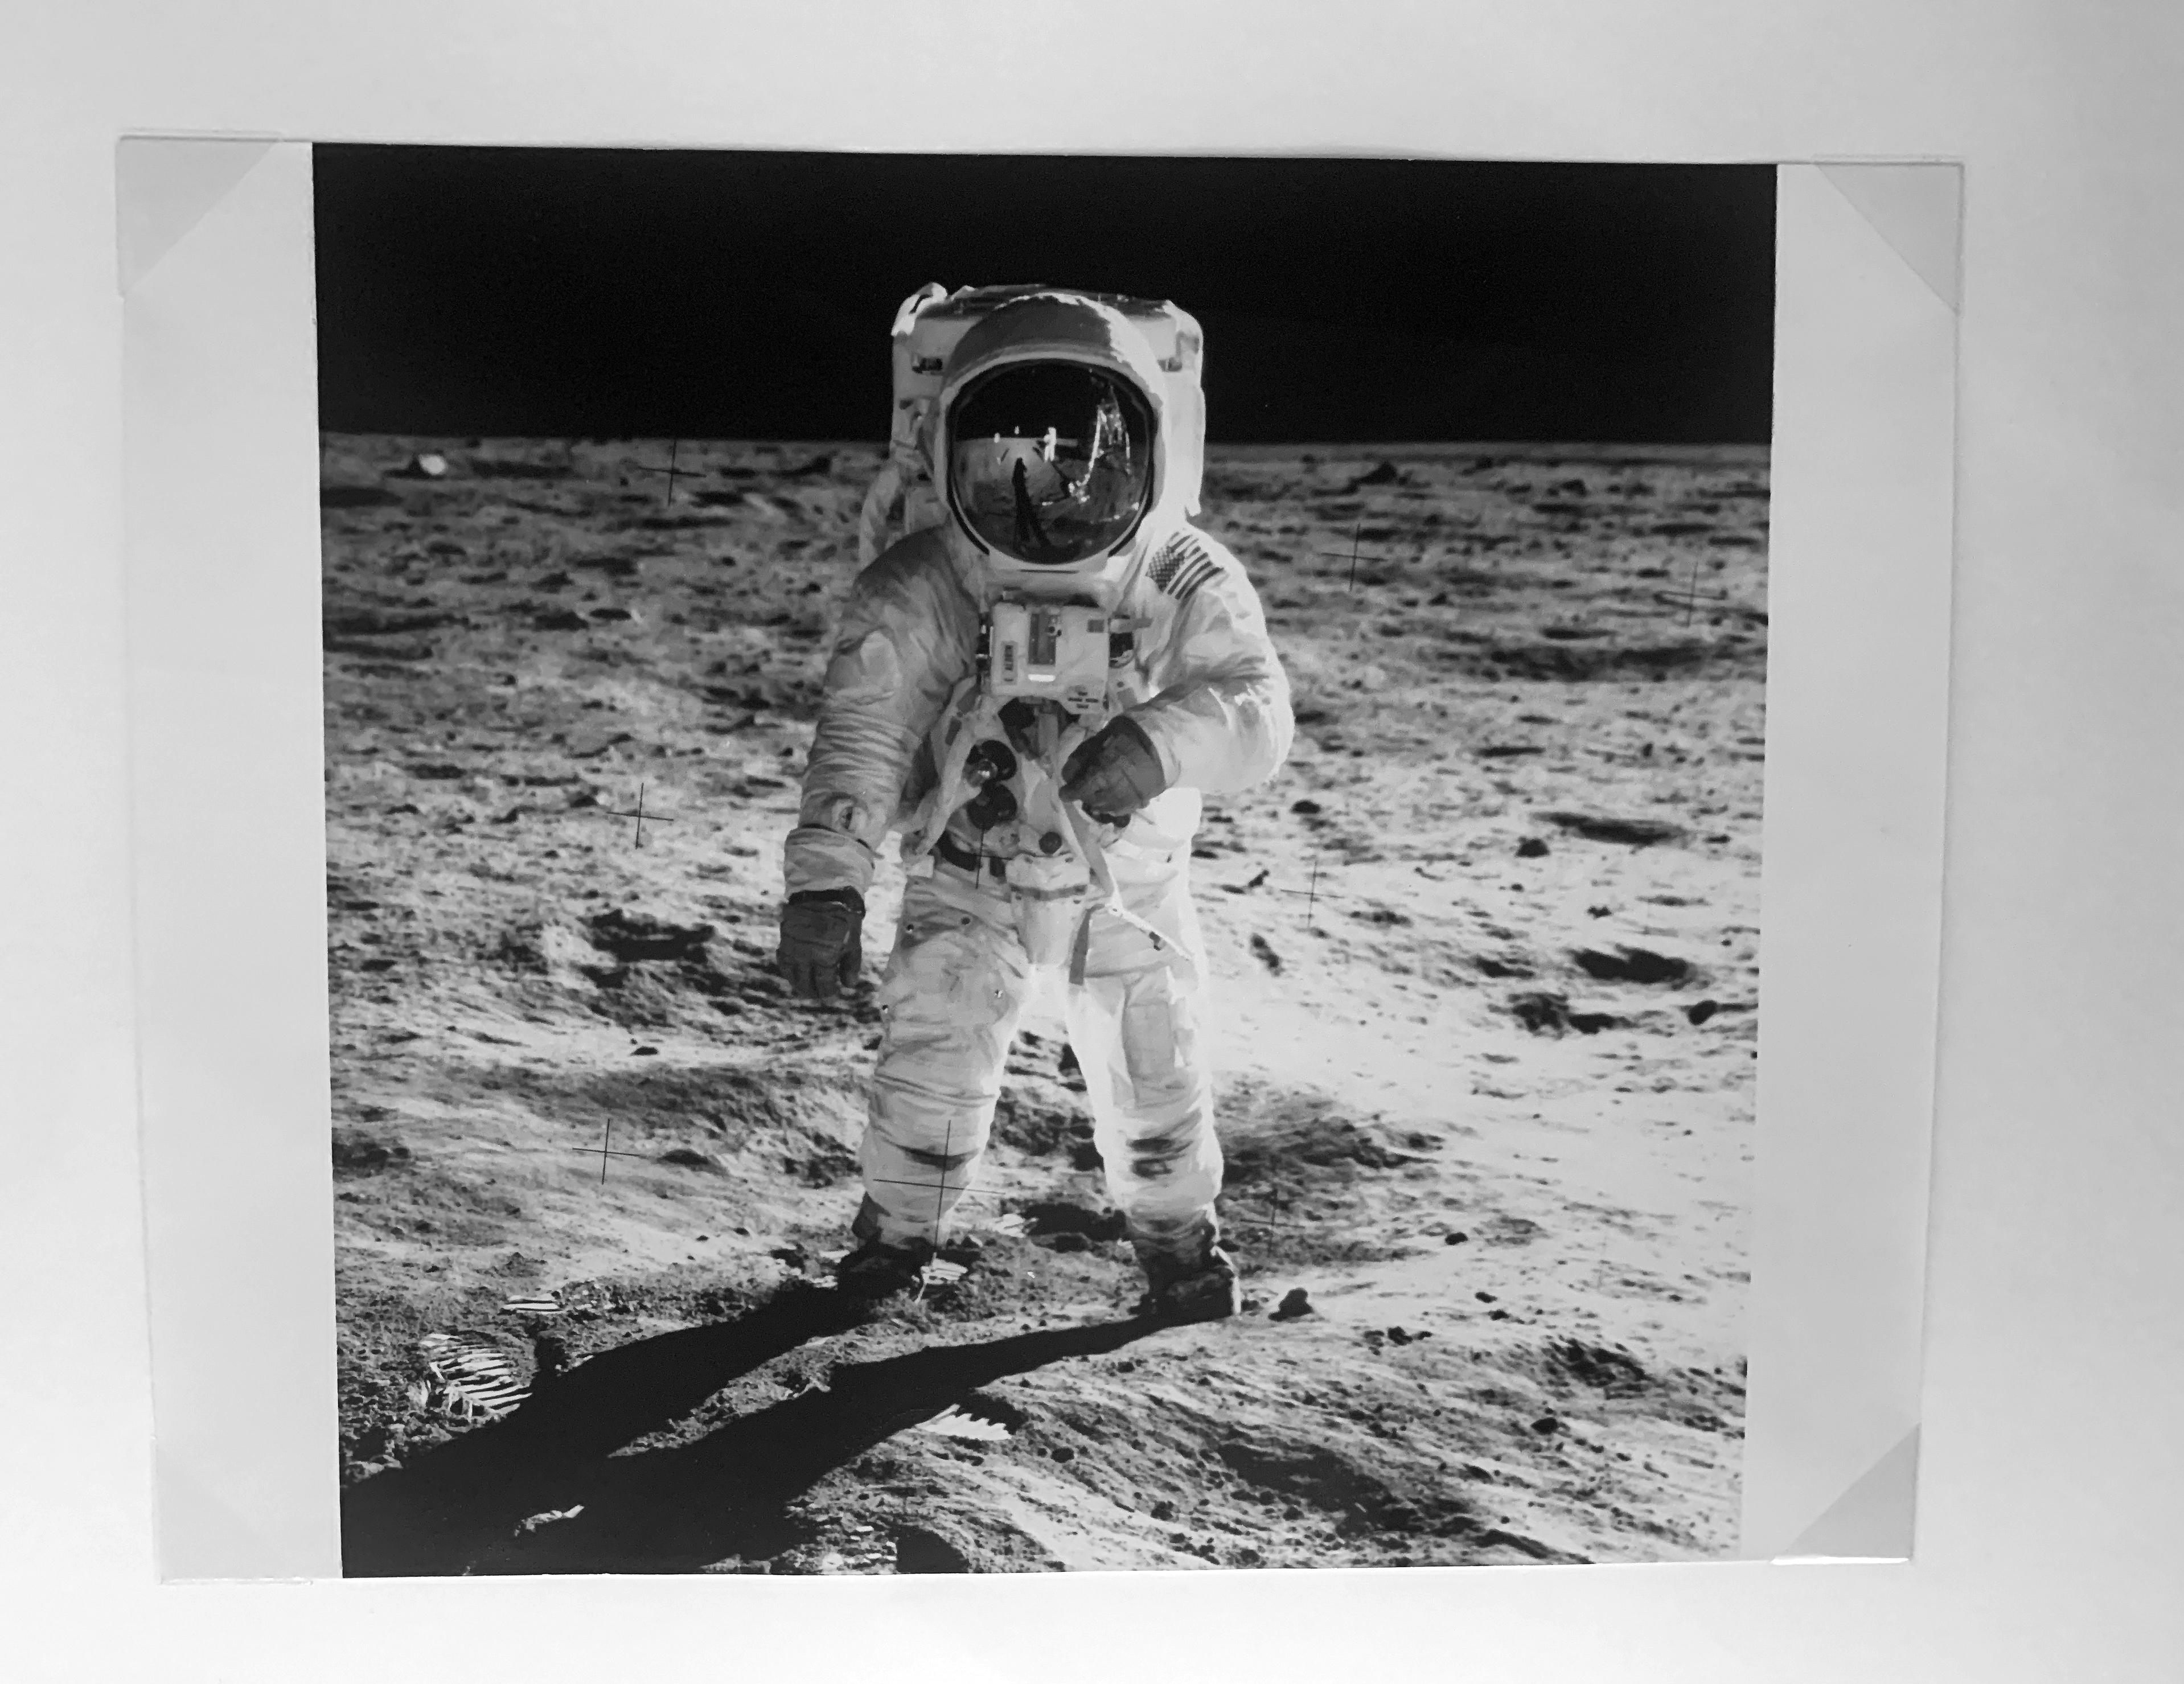 An 11 x 14 black and white print of Buzz Aldrin from the original negative before Nasa added “more” space on the top of the image, which is common and the version of Visor that most people have. The 11 x 14 gelatin silver NASA prints were made as